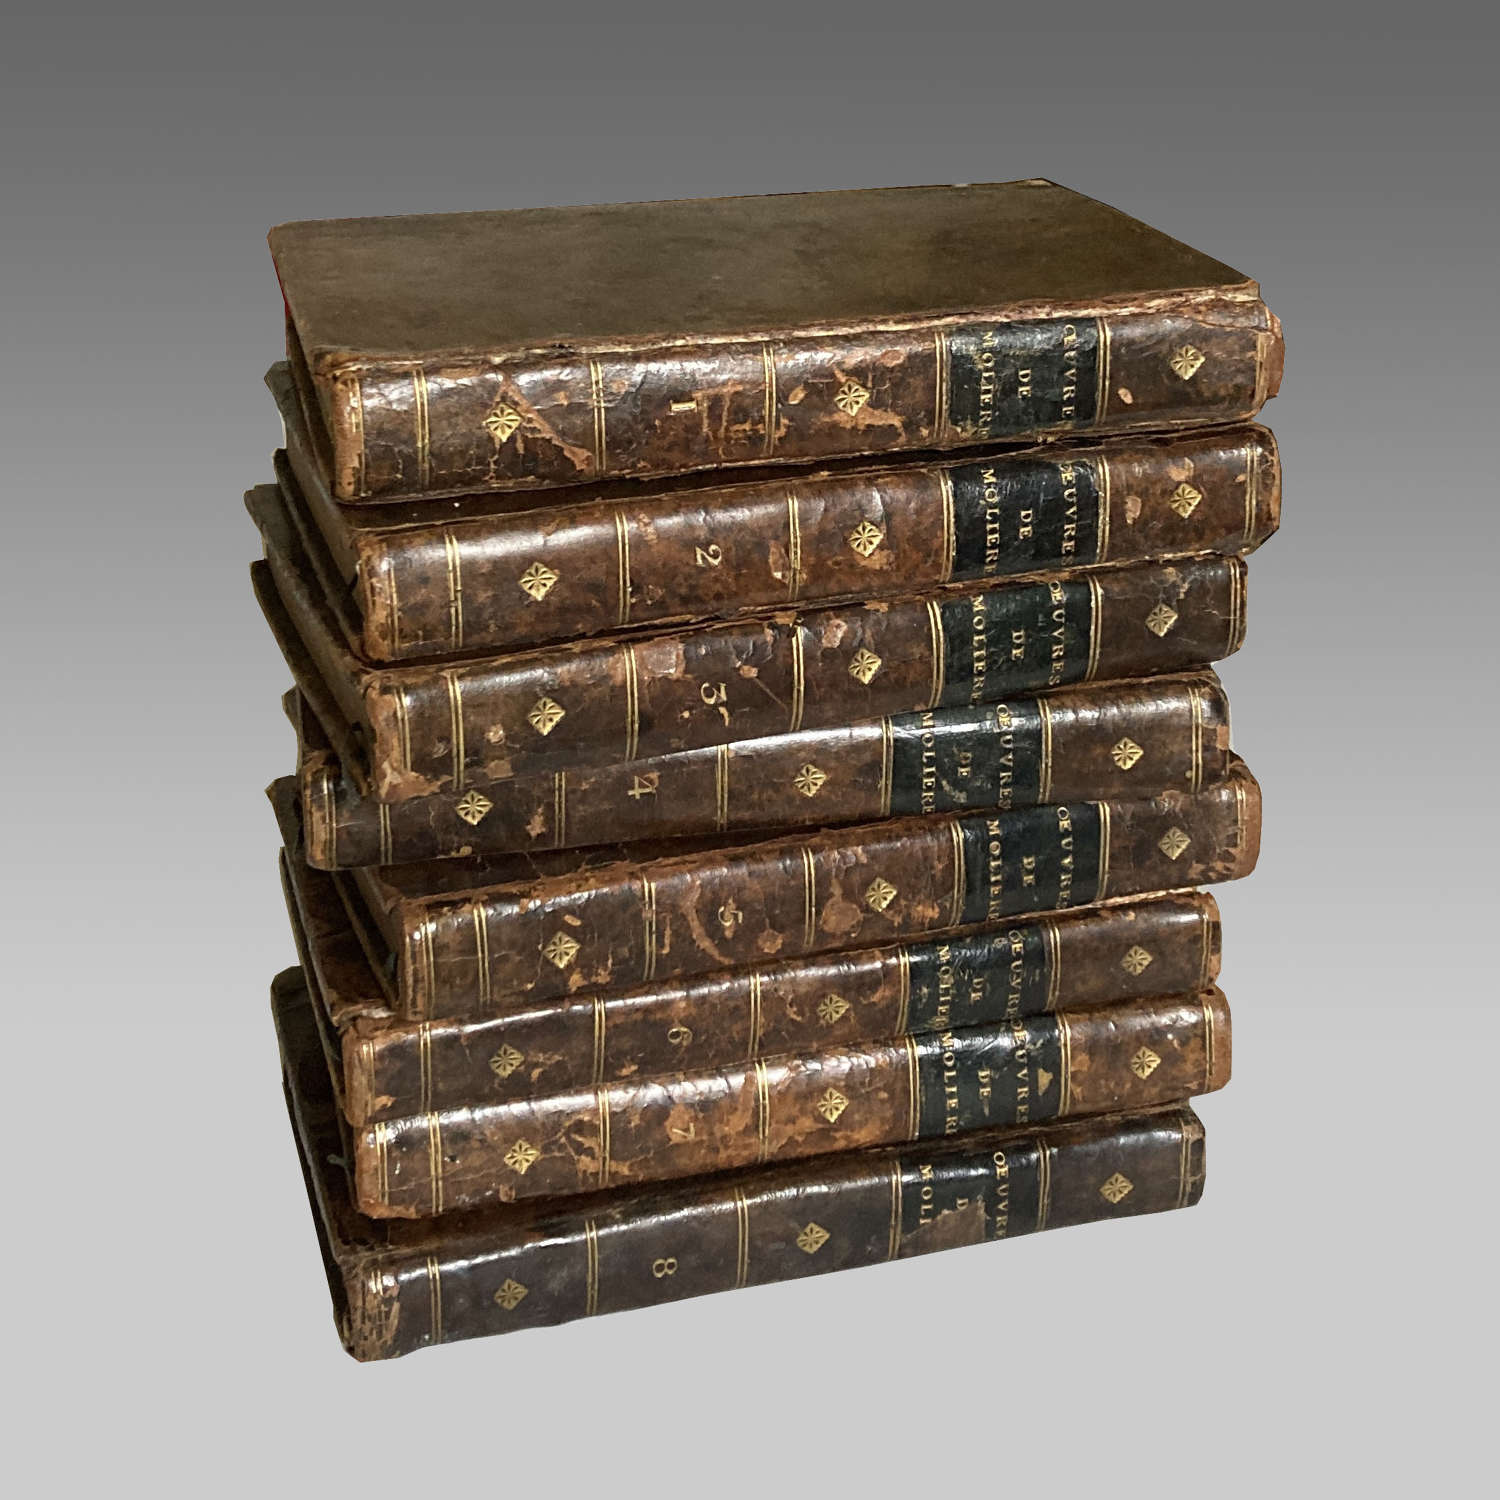 Eight Volumes, ‘The Works of Molière, published in 1813